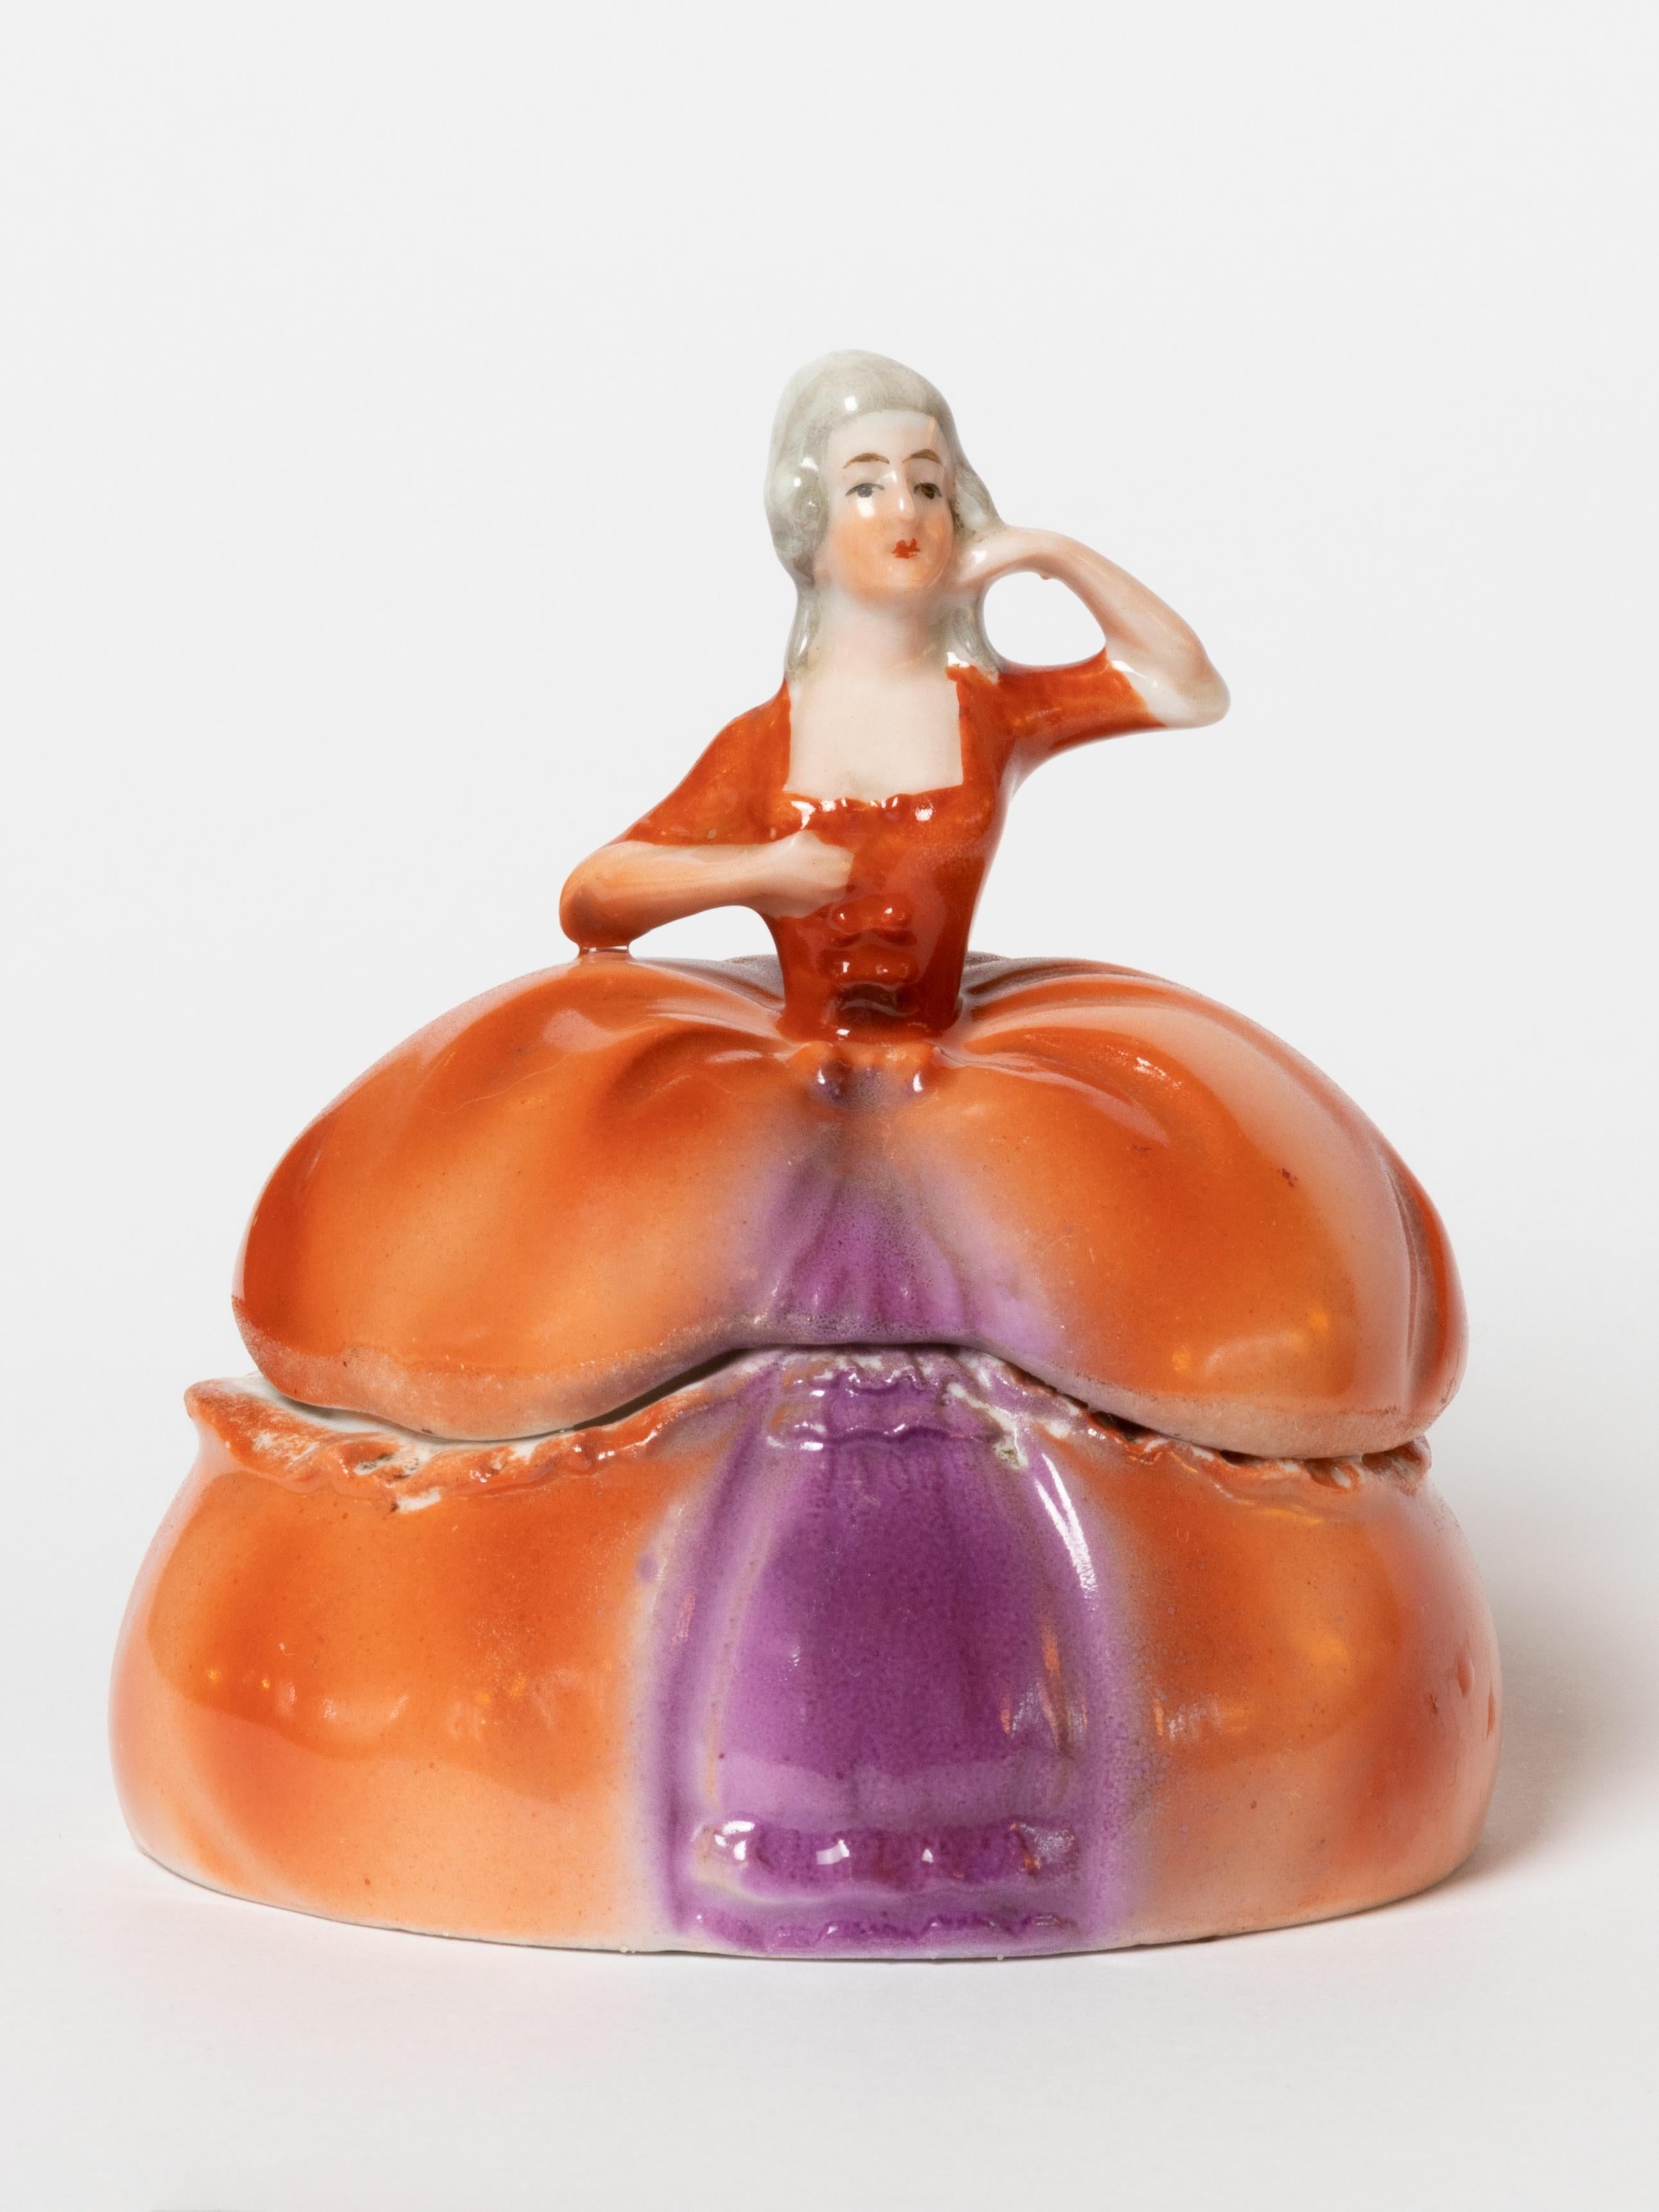 A Madame Pompadour E&R ceramic dresser doll powder box or trinket box.
A Jewelry holder for vanity accessories or souvenirs
Made in Bavaria by Schumann Arzberg Germany Golden Crown E&R. 
